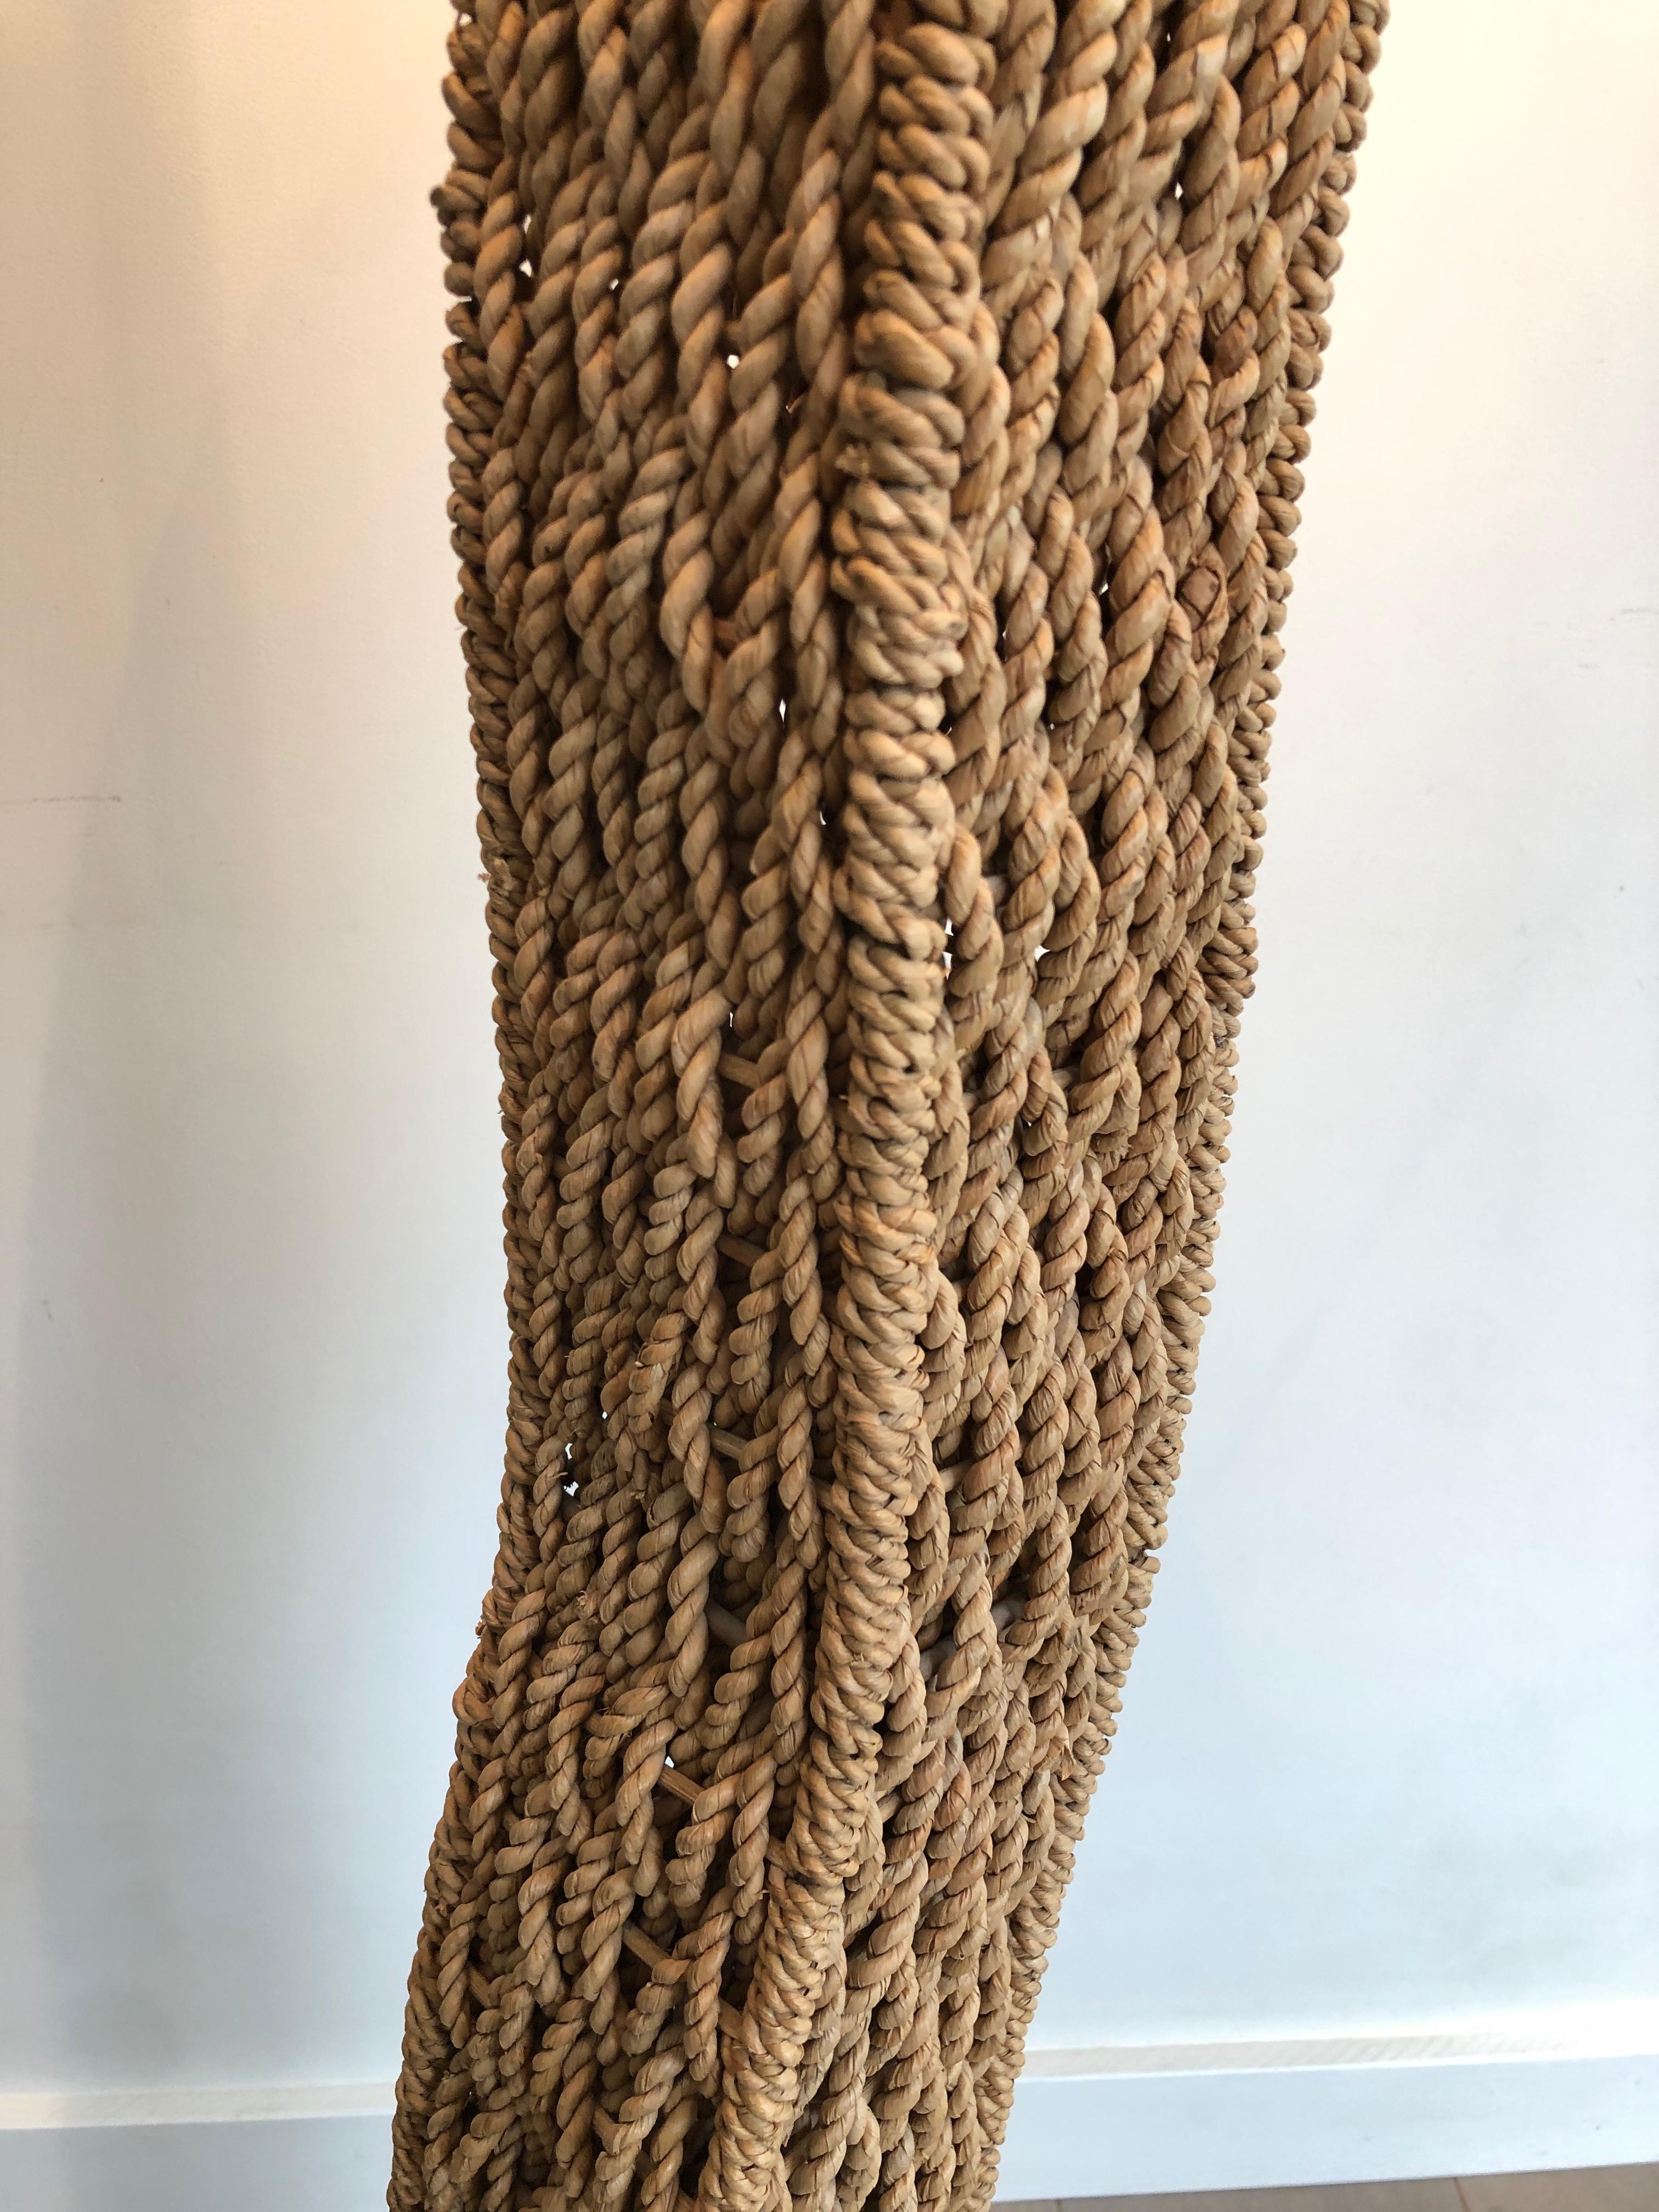 Braided Rope Floor Lamp on a Square Metal Base. Japonses Work, circa 1980 For Sale 1